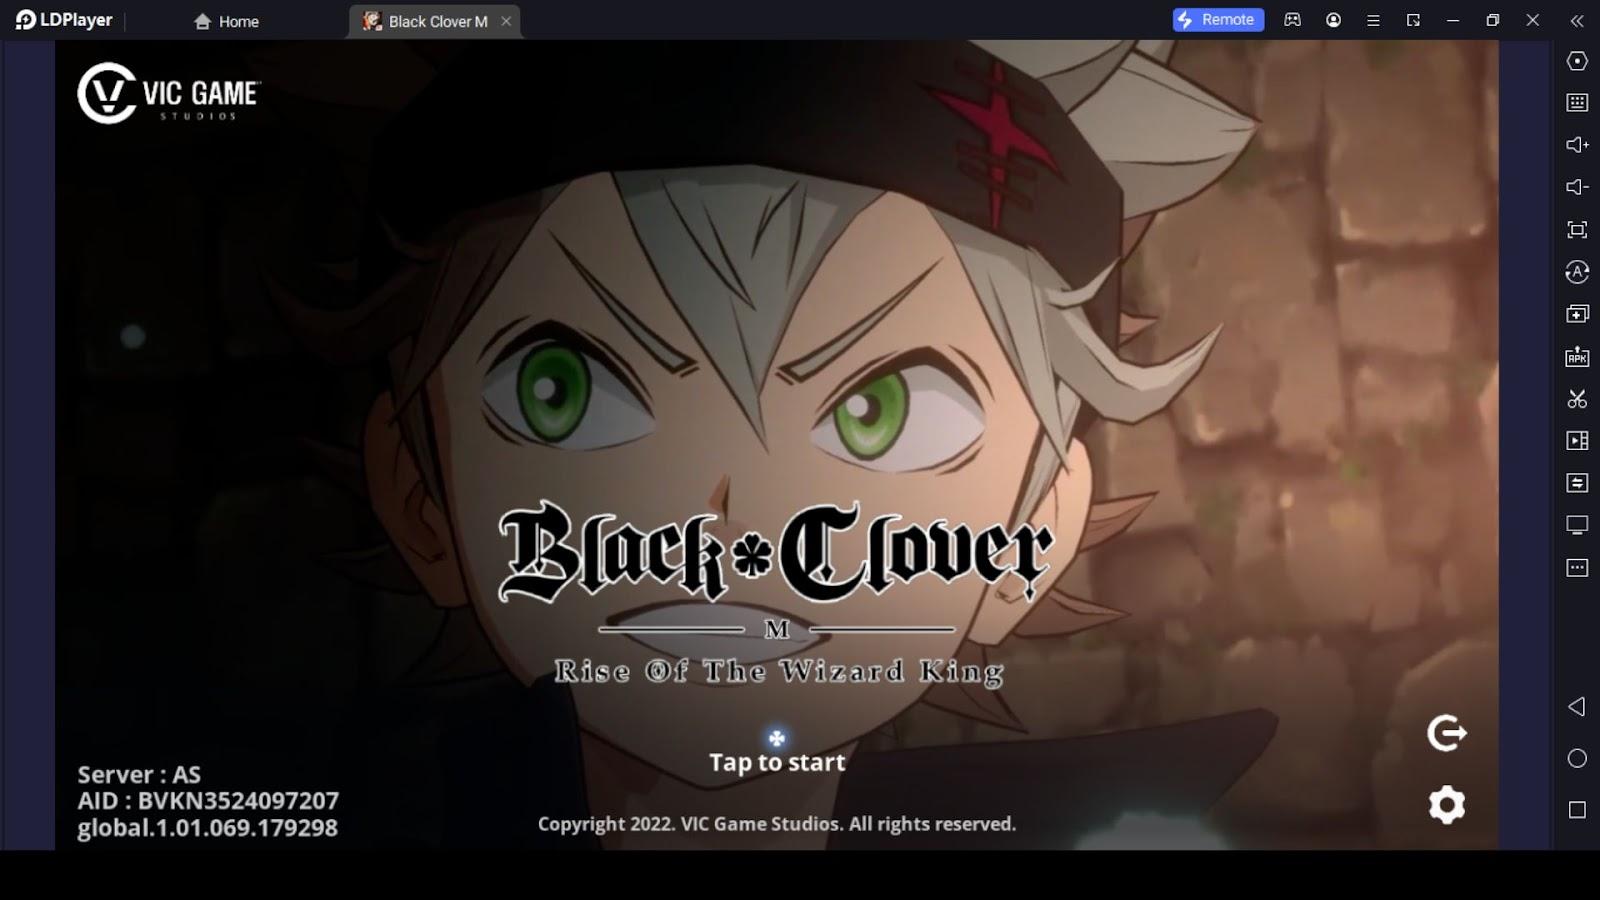 How to Play Black Clover M